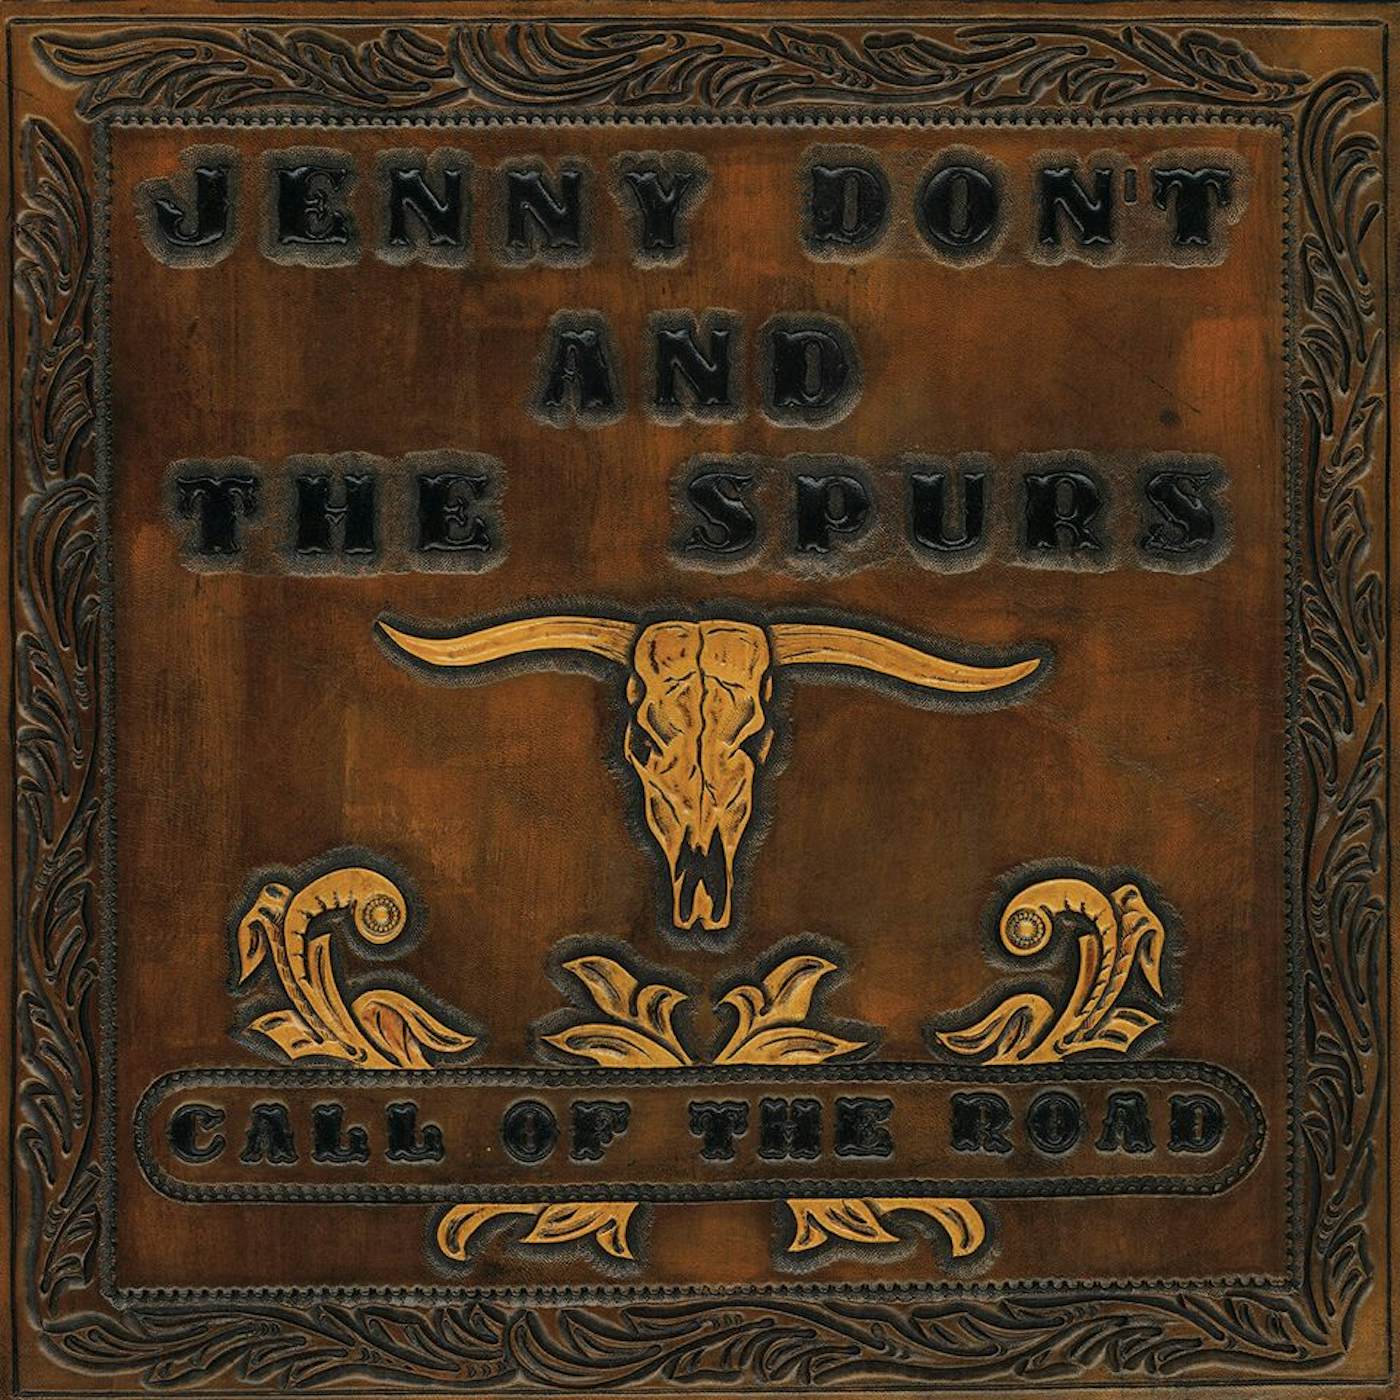 Jenny Don't And The Spurs CALL OF THE ROAD CD